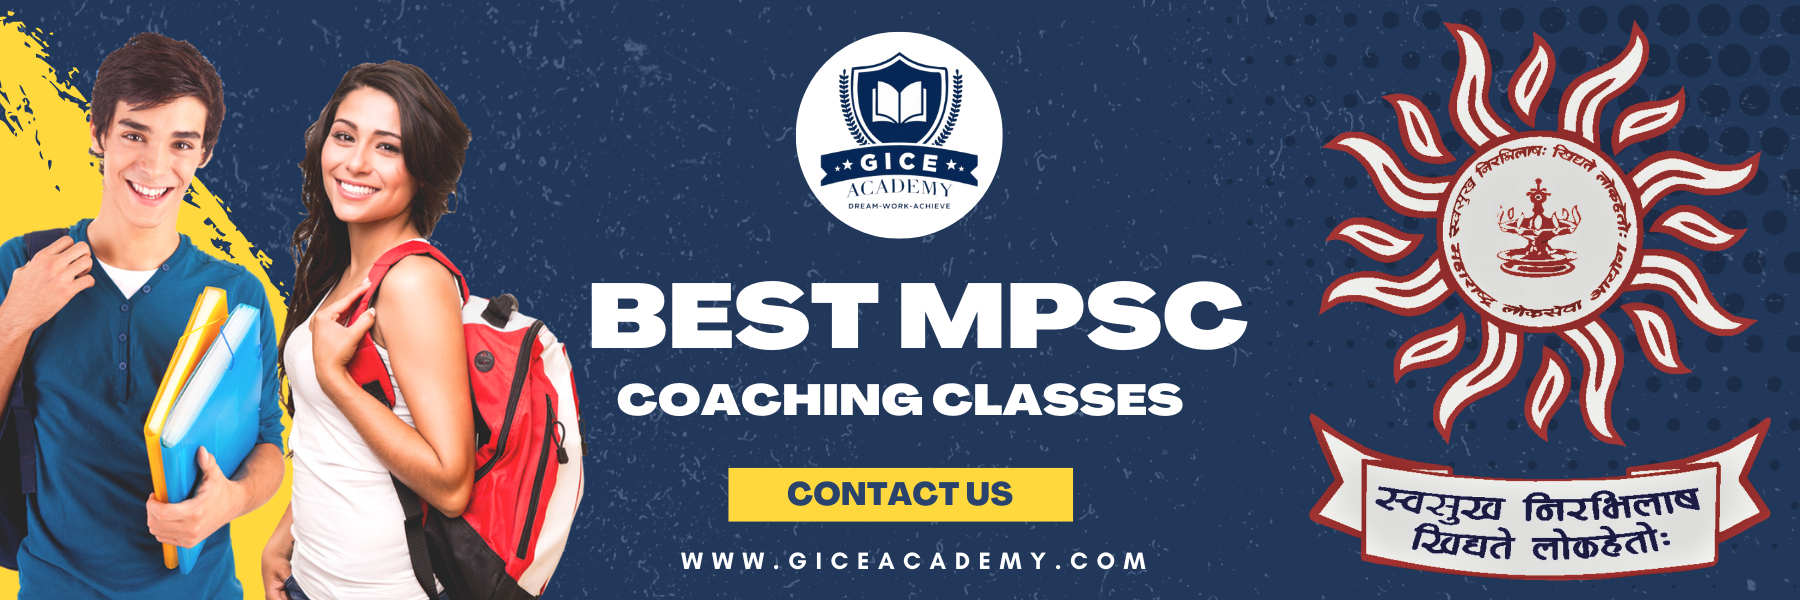 Best MPSC Coaching Classes in Dombivli, Thane